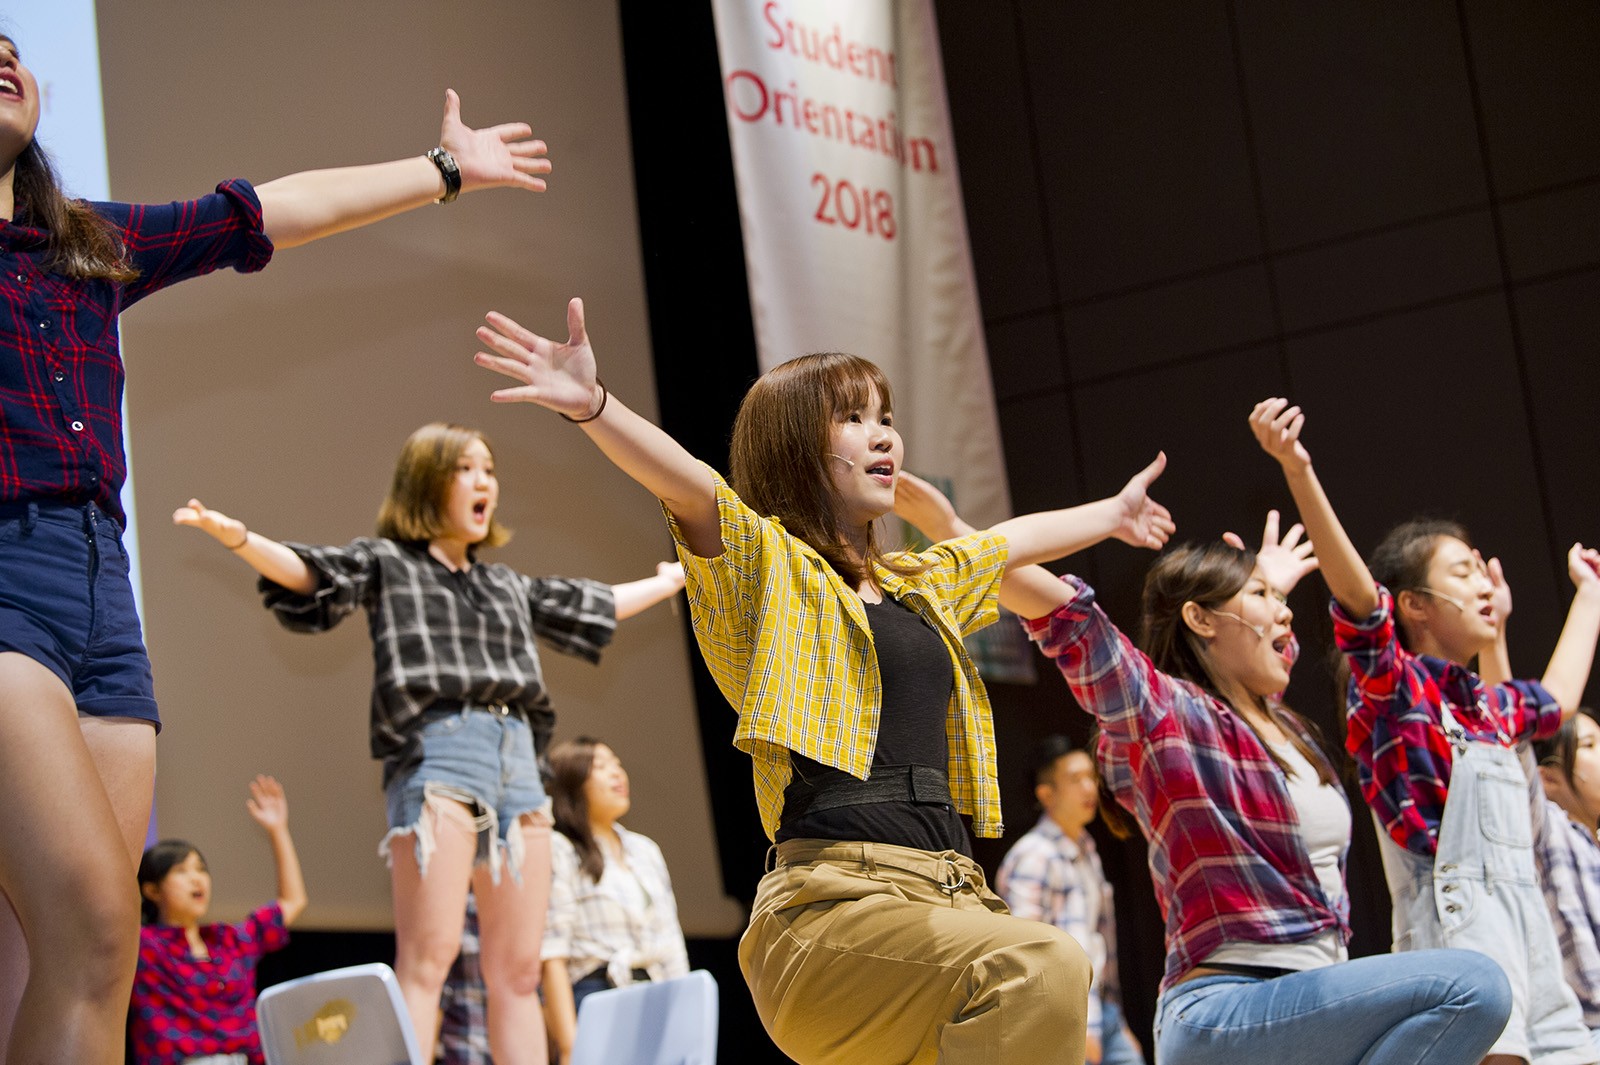 CityU singers and dancers liven up proceedings with excerpts from the musical Footloose.